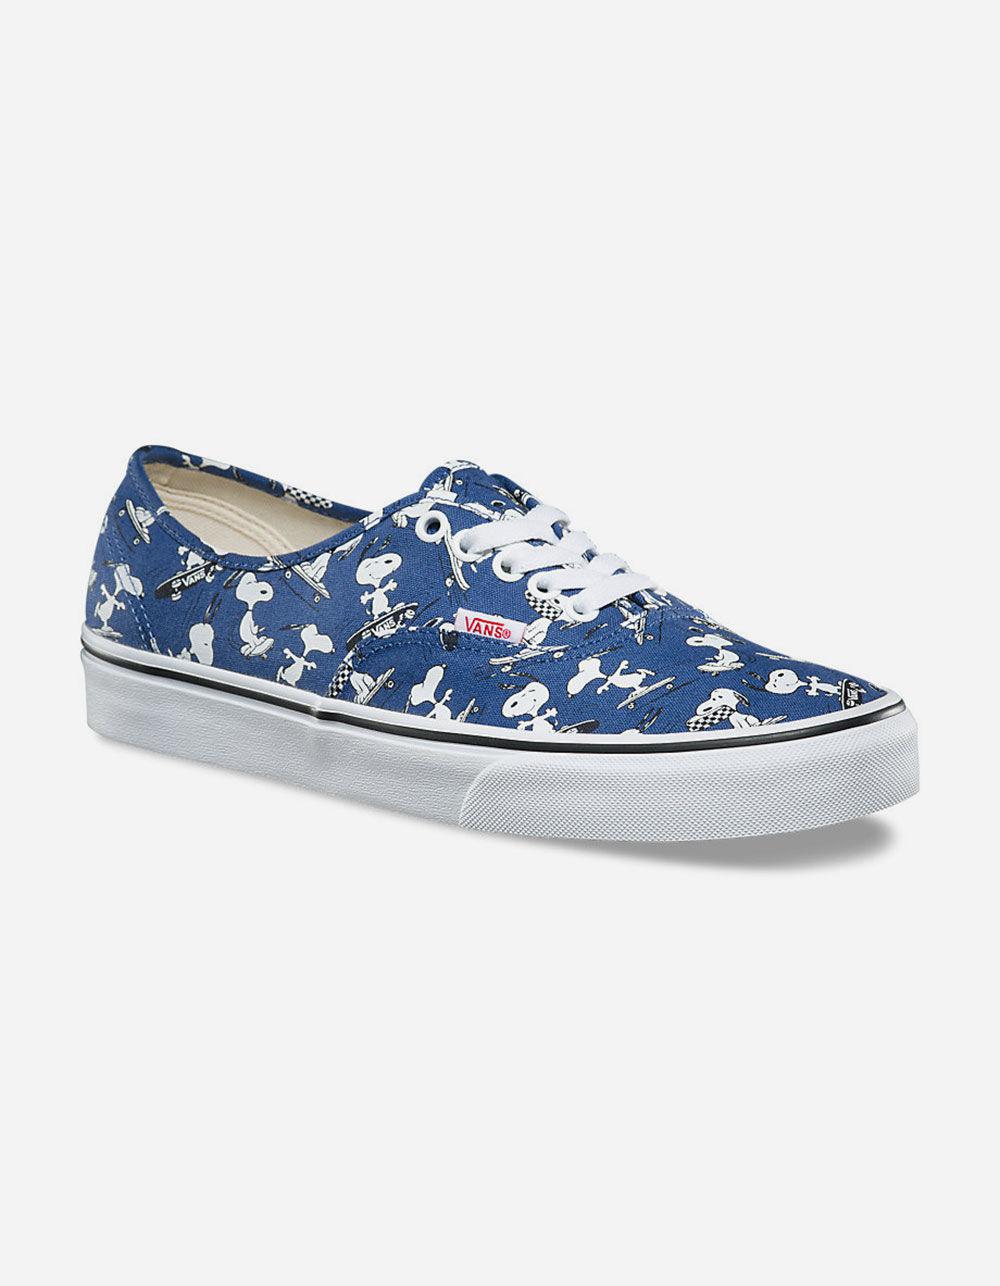 vans snoopy shoes peanuts skating authentic